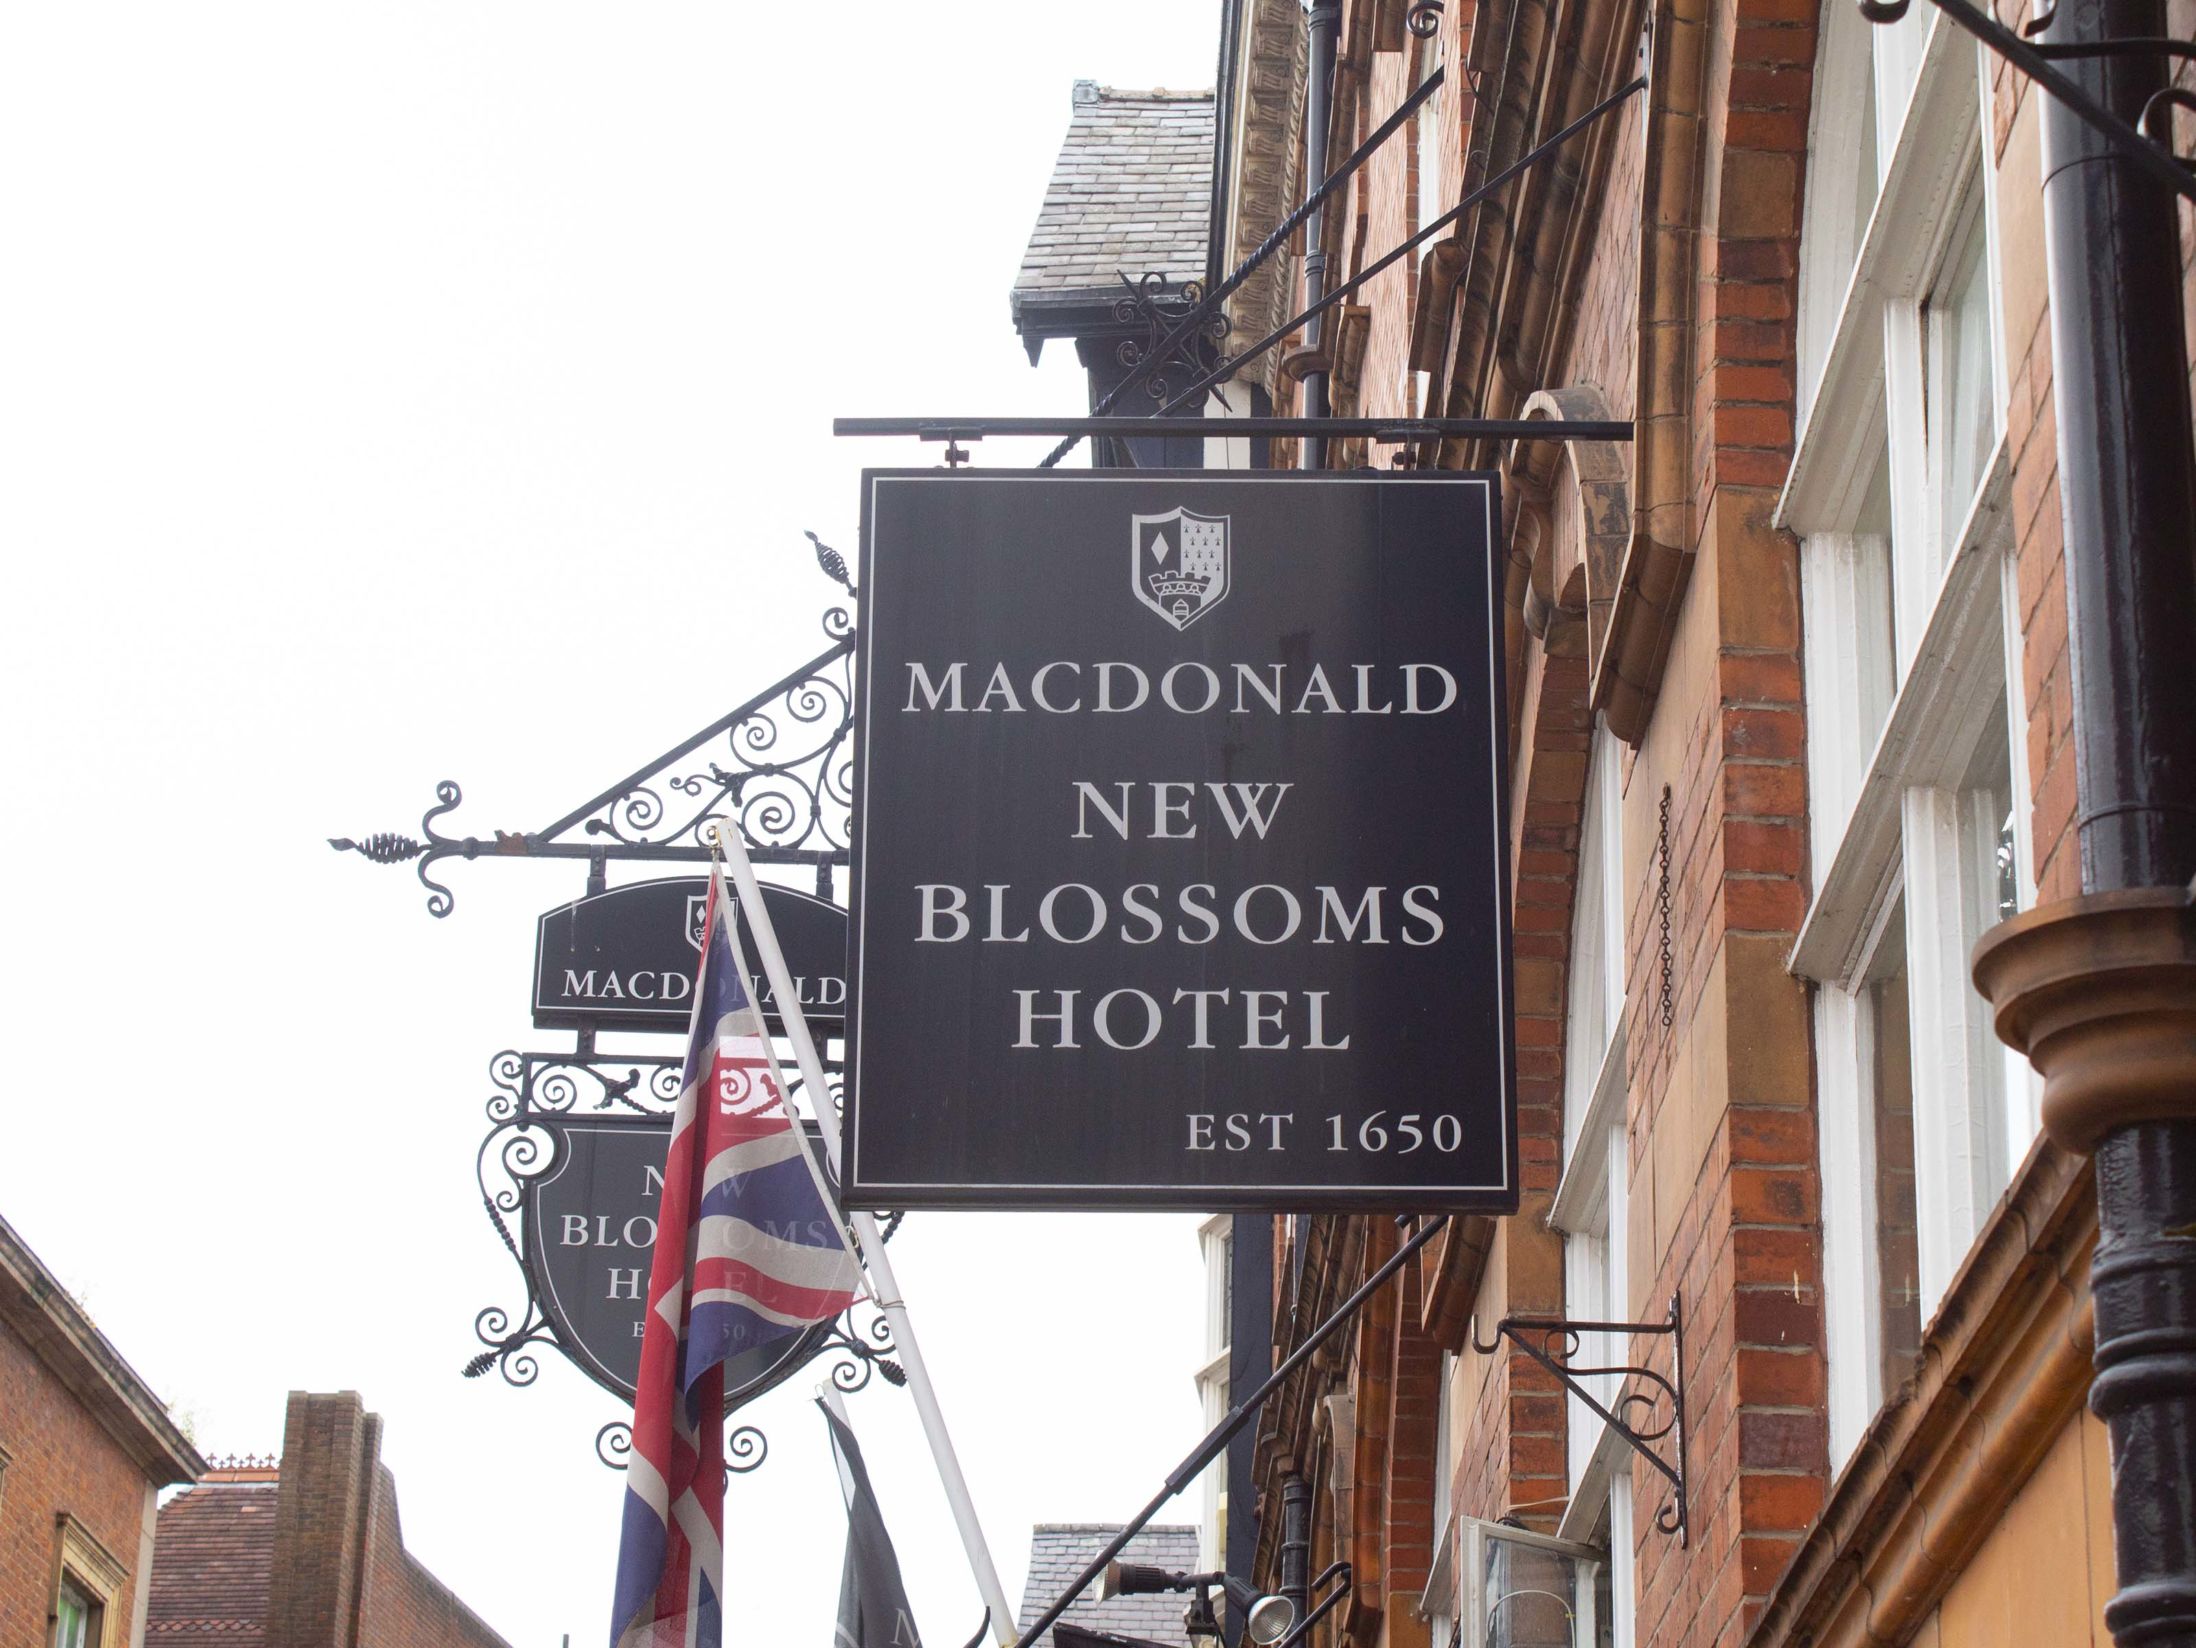 Great Meeting Rooms in Chester - MacDonald New Blossoms Hotel